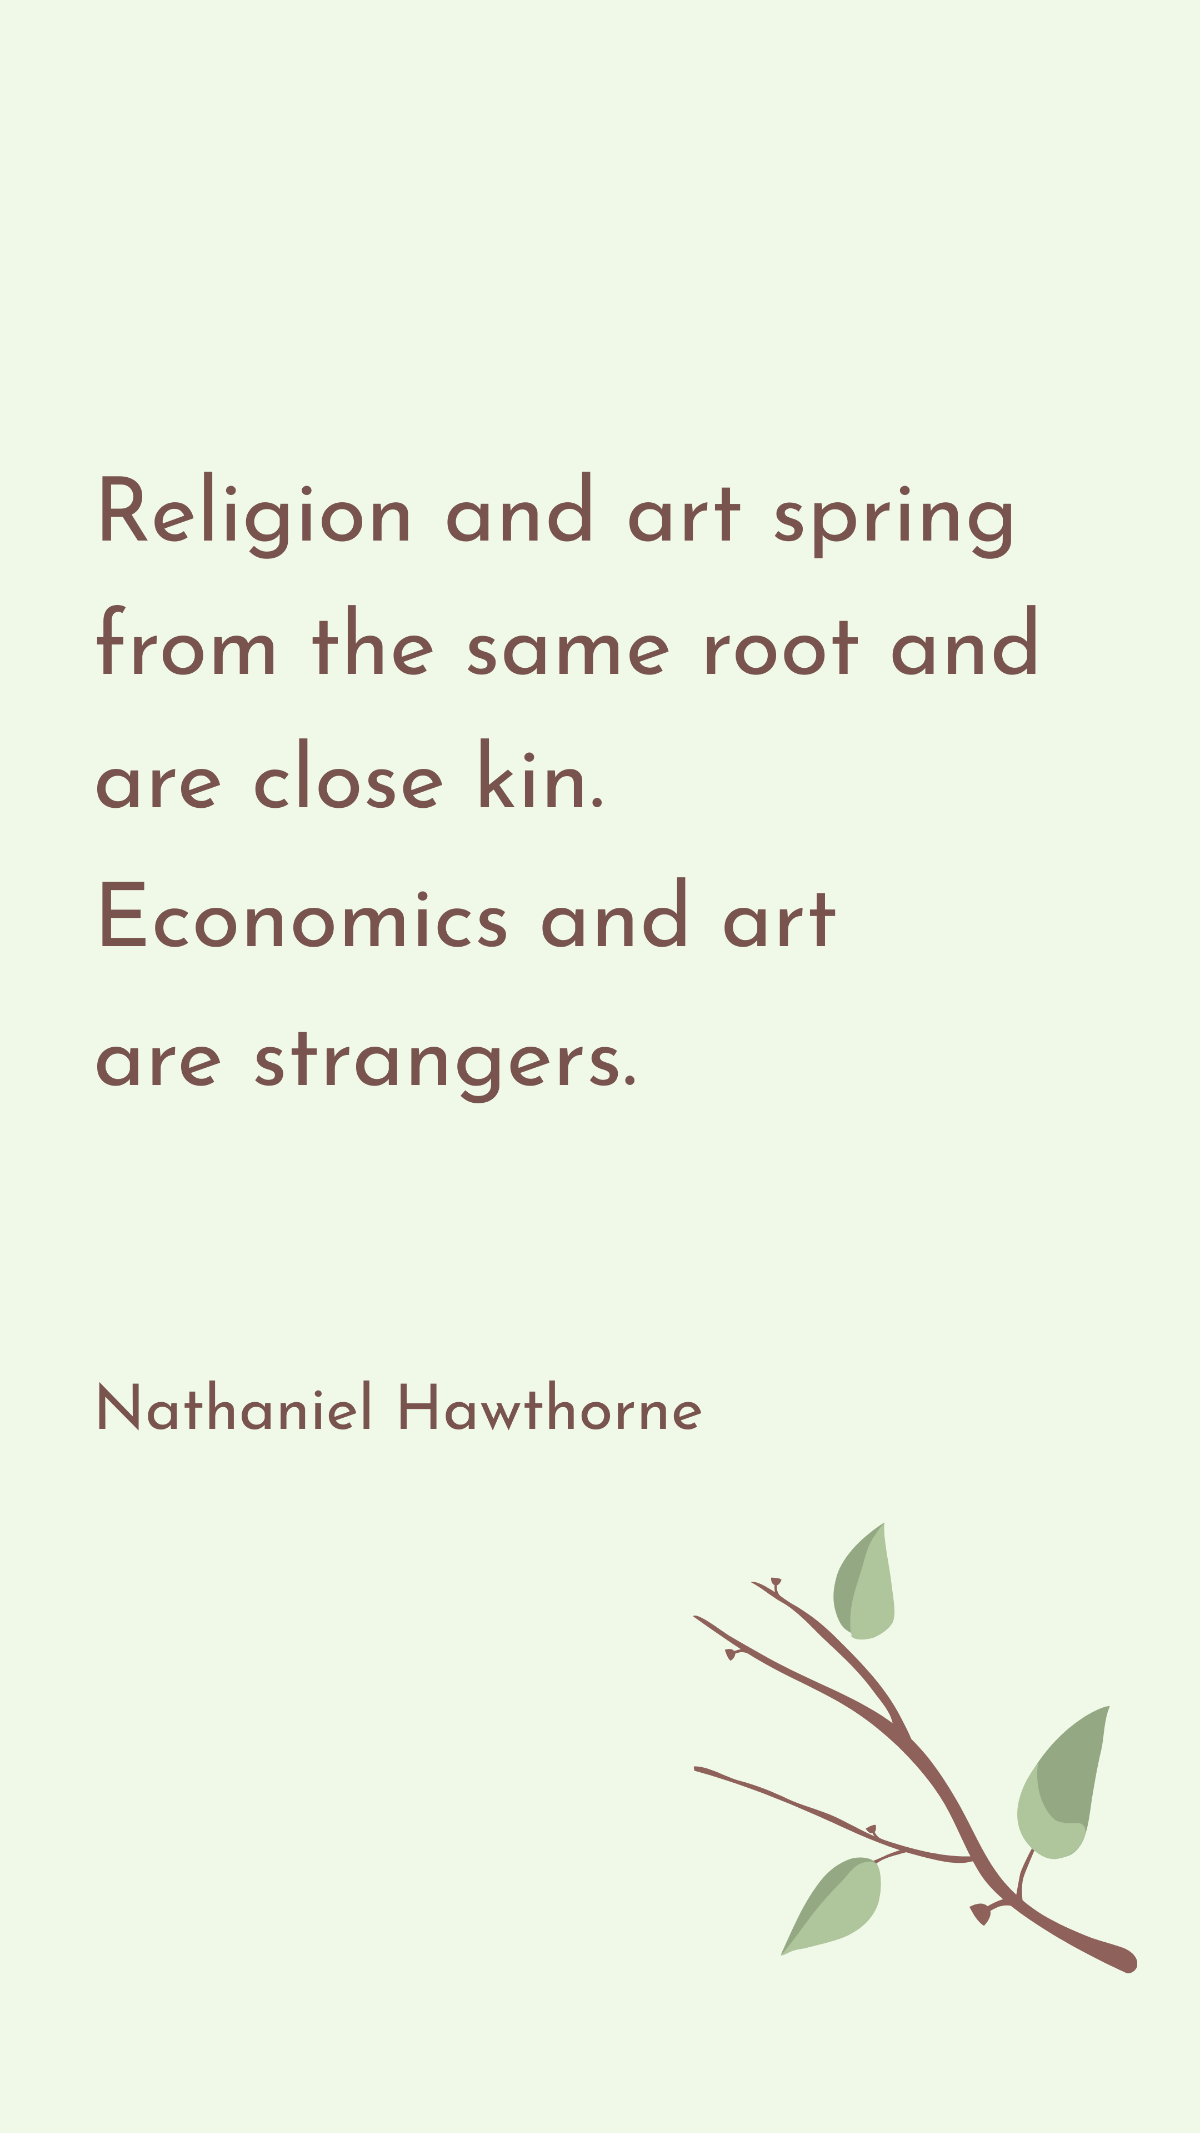 Free Nathaniel Hawthorne - Religion and art spring from the same root and are close kin. Economics and art are strangers. Template